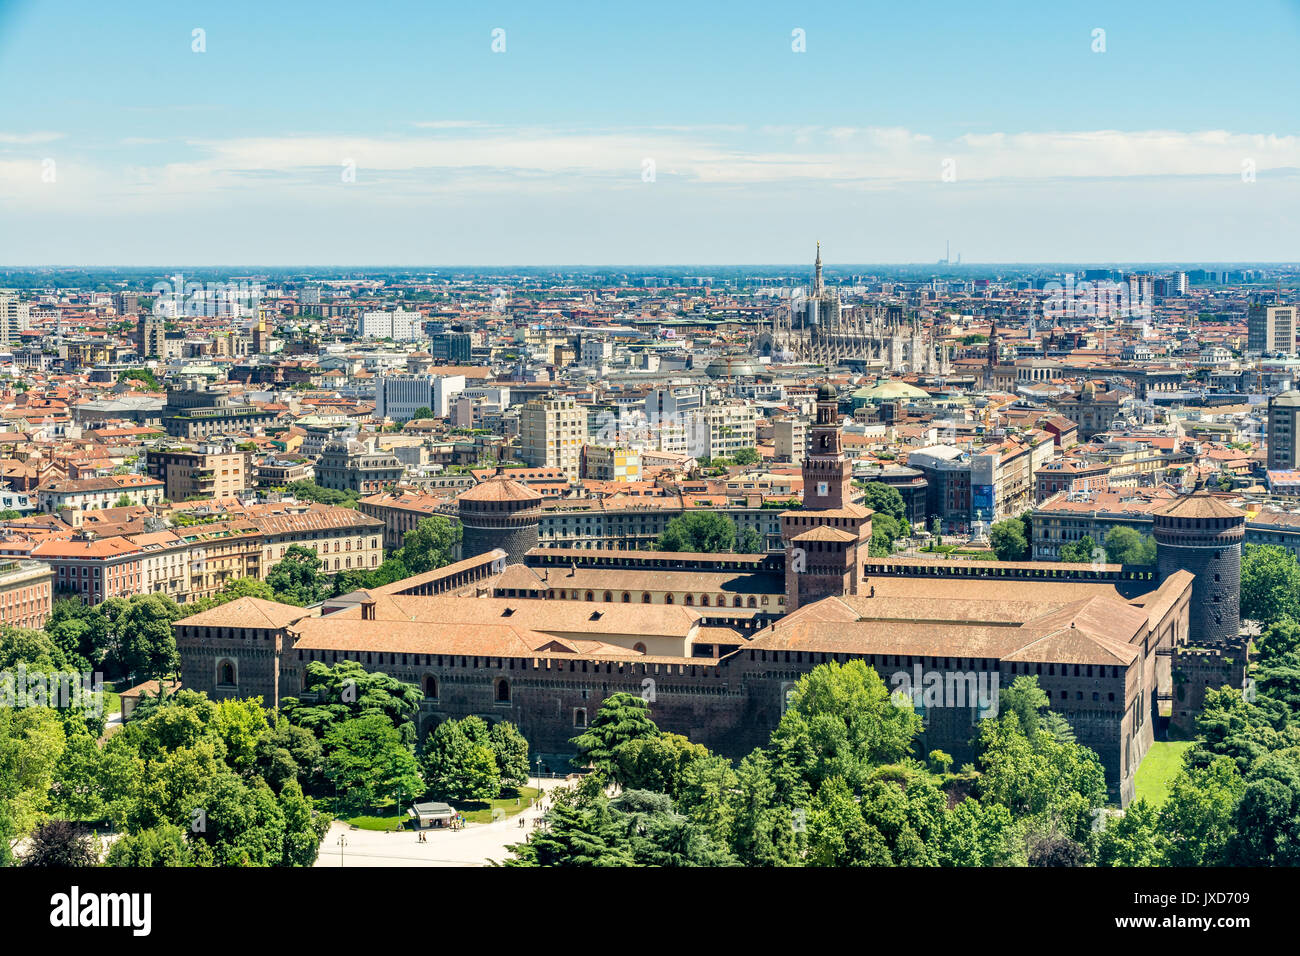 Aerial view from the Branca Tower (Torre Branca) of the Sforza Castle (Castello Sforzesco) and cityscape of Milan, Italy Stock Photo